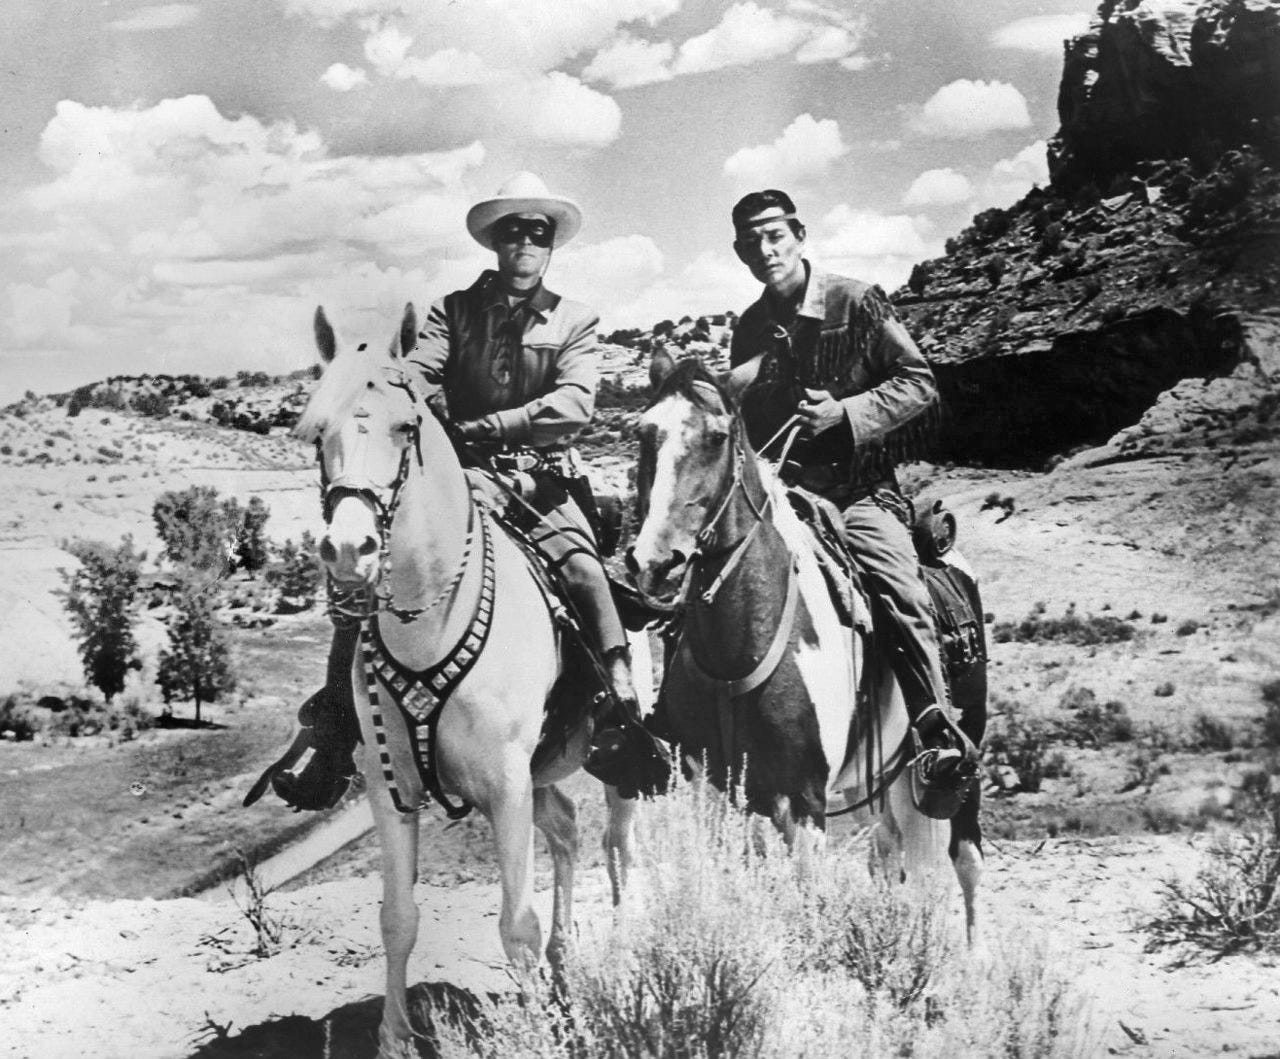 https://bluewaterhealthyliving.com/wp-content/uploads/2018/07/Lone_Ranger_and_Tonto_1956.jpg